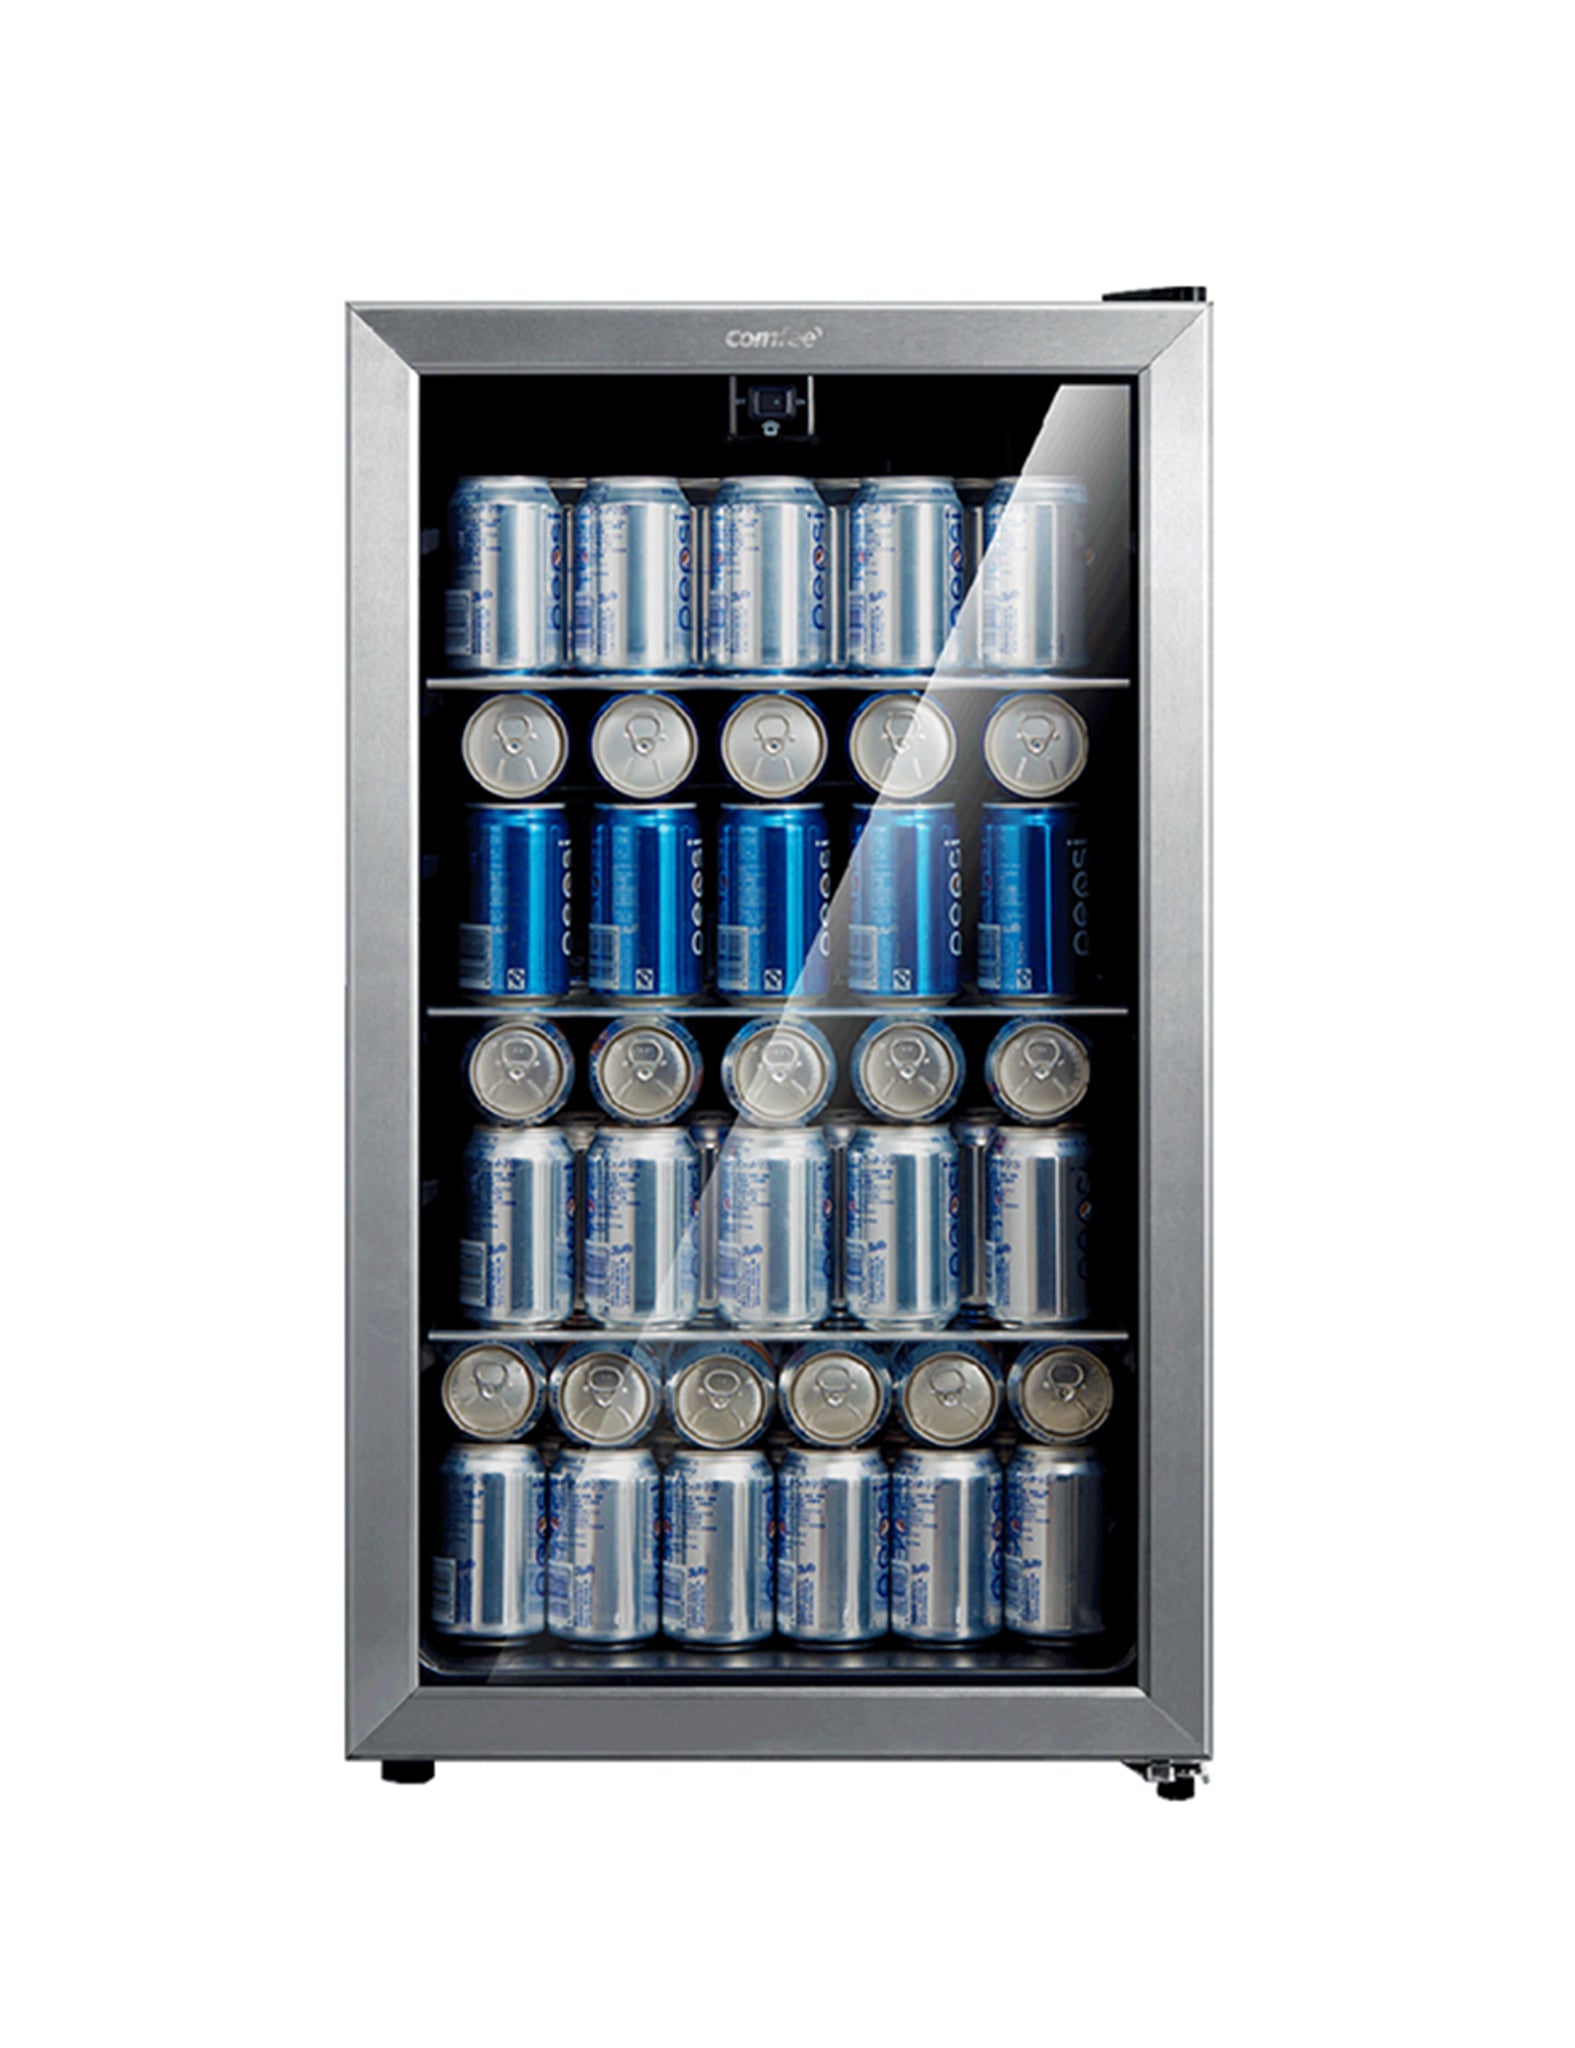 Comfee 115 Cans Beverage Refrigerator in the Beverage